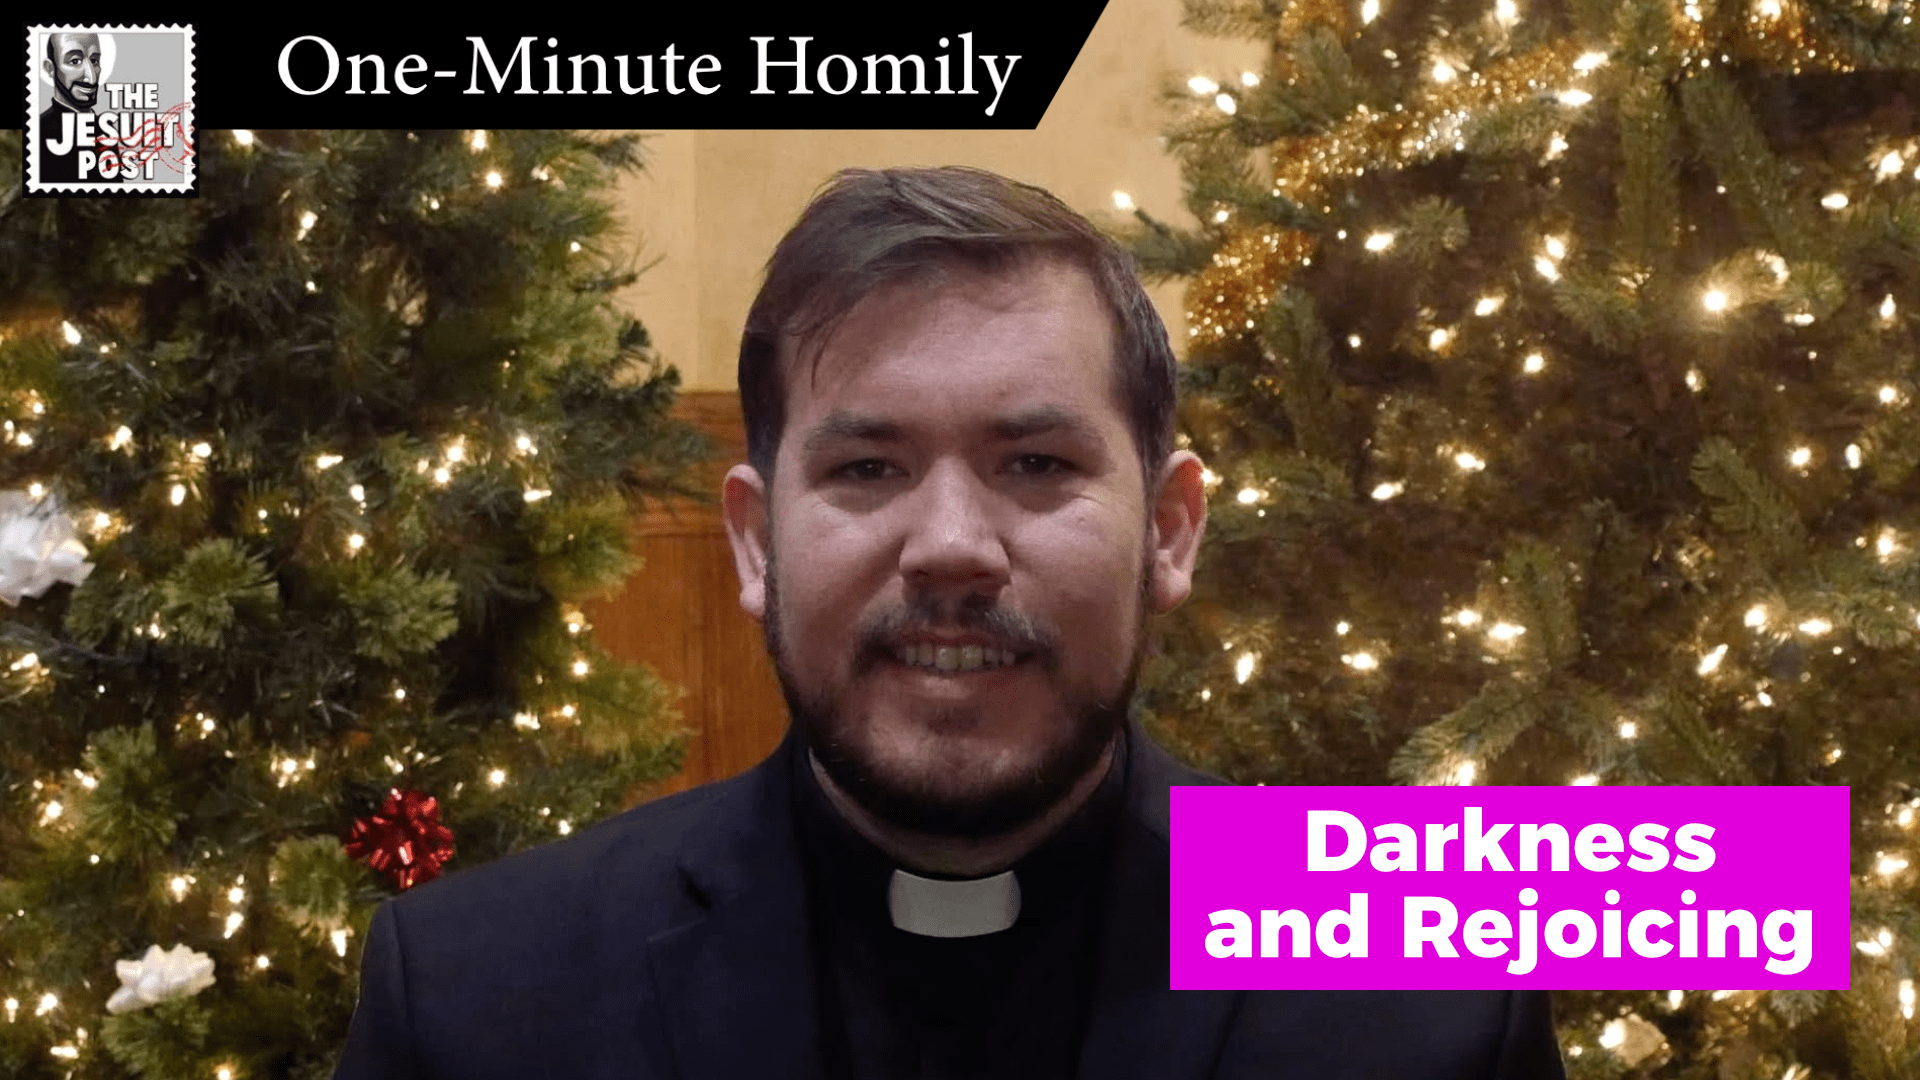 One-Minute Homily: “Darkness and Rejoicing”